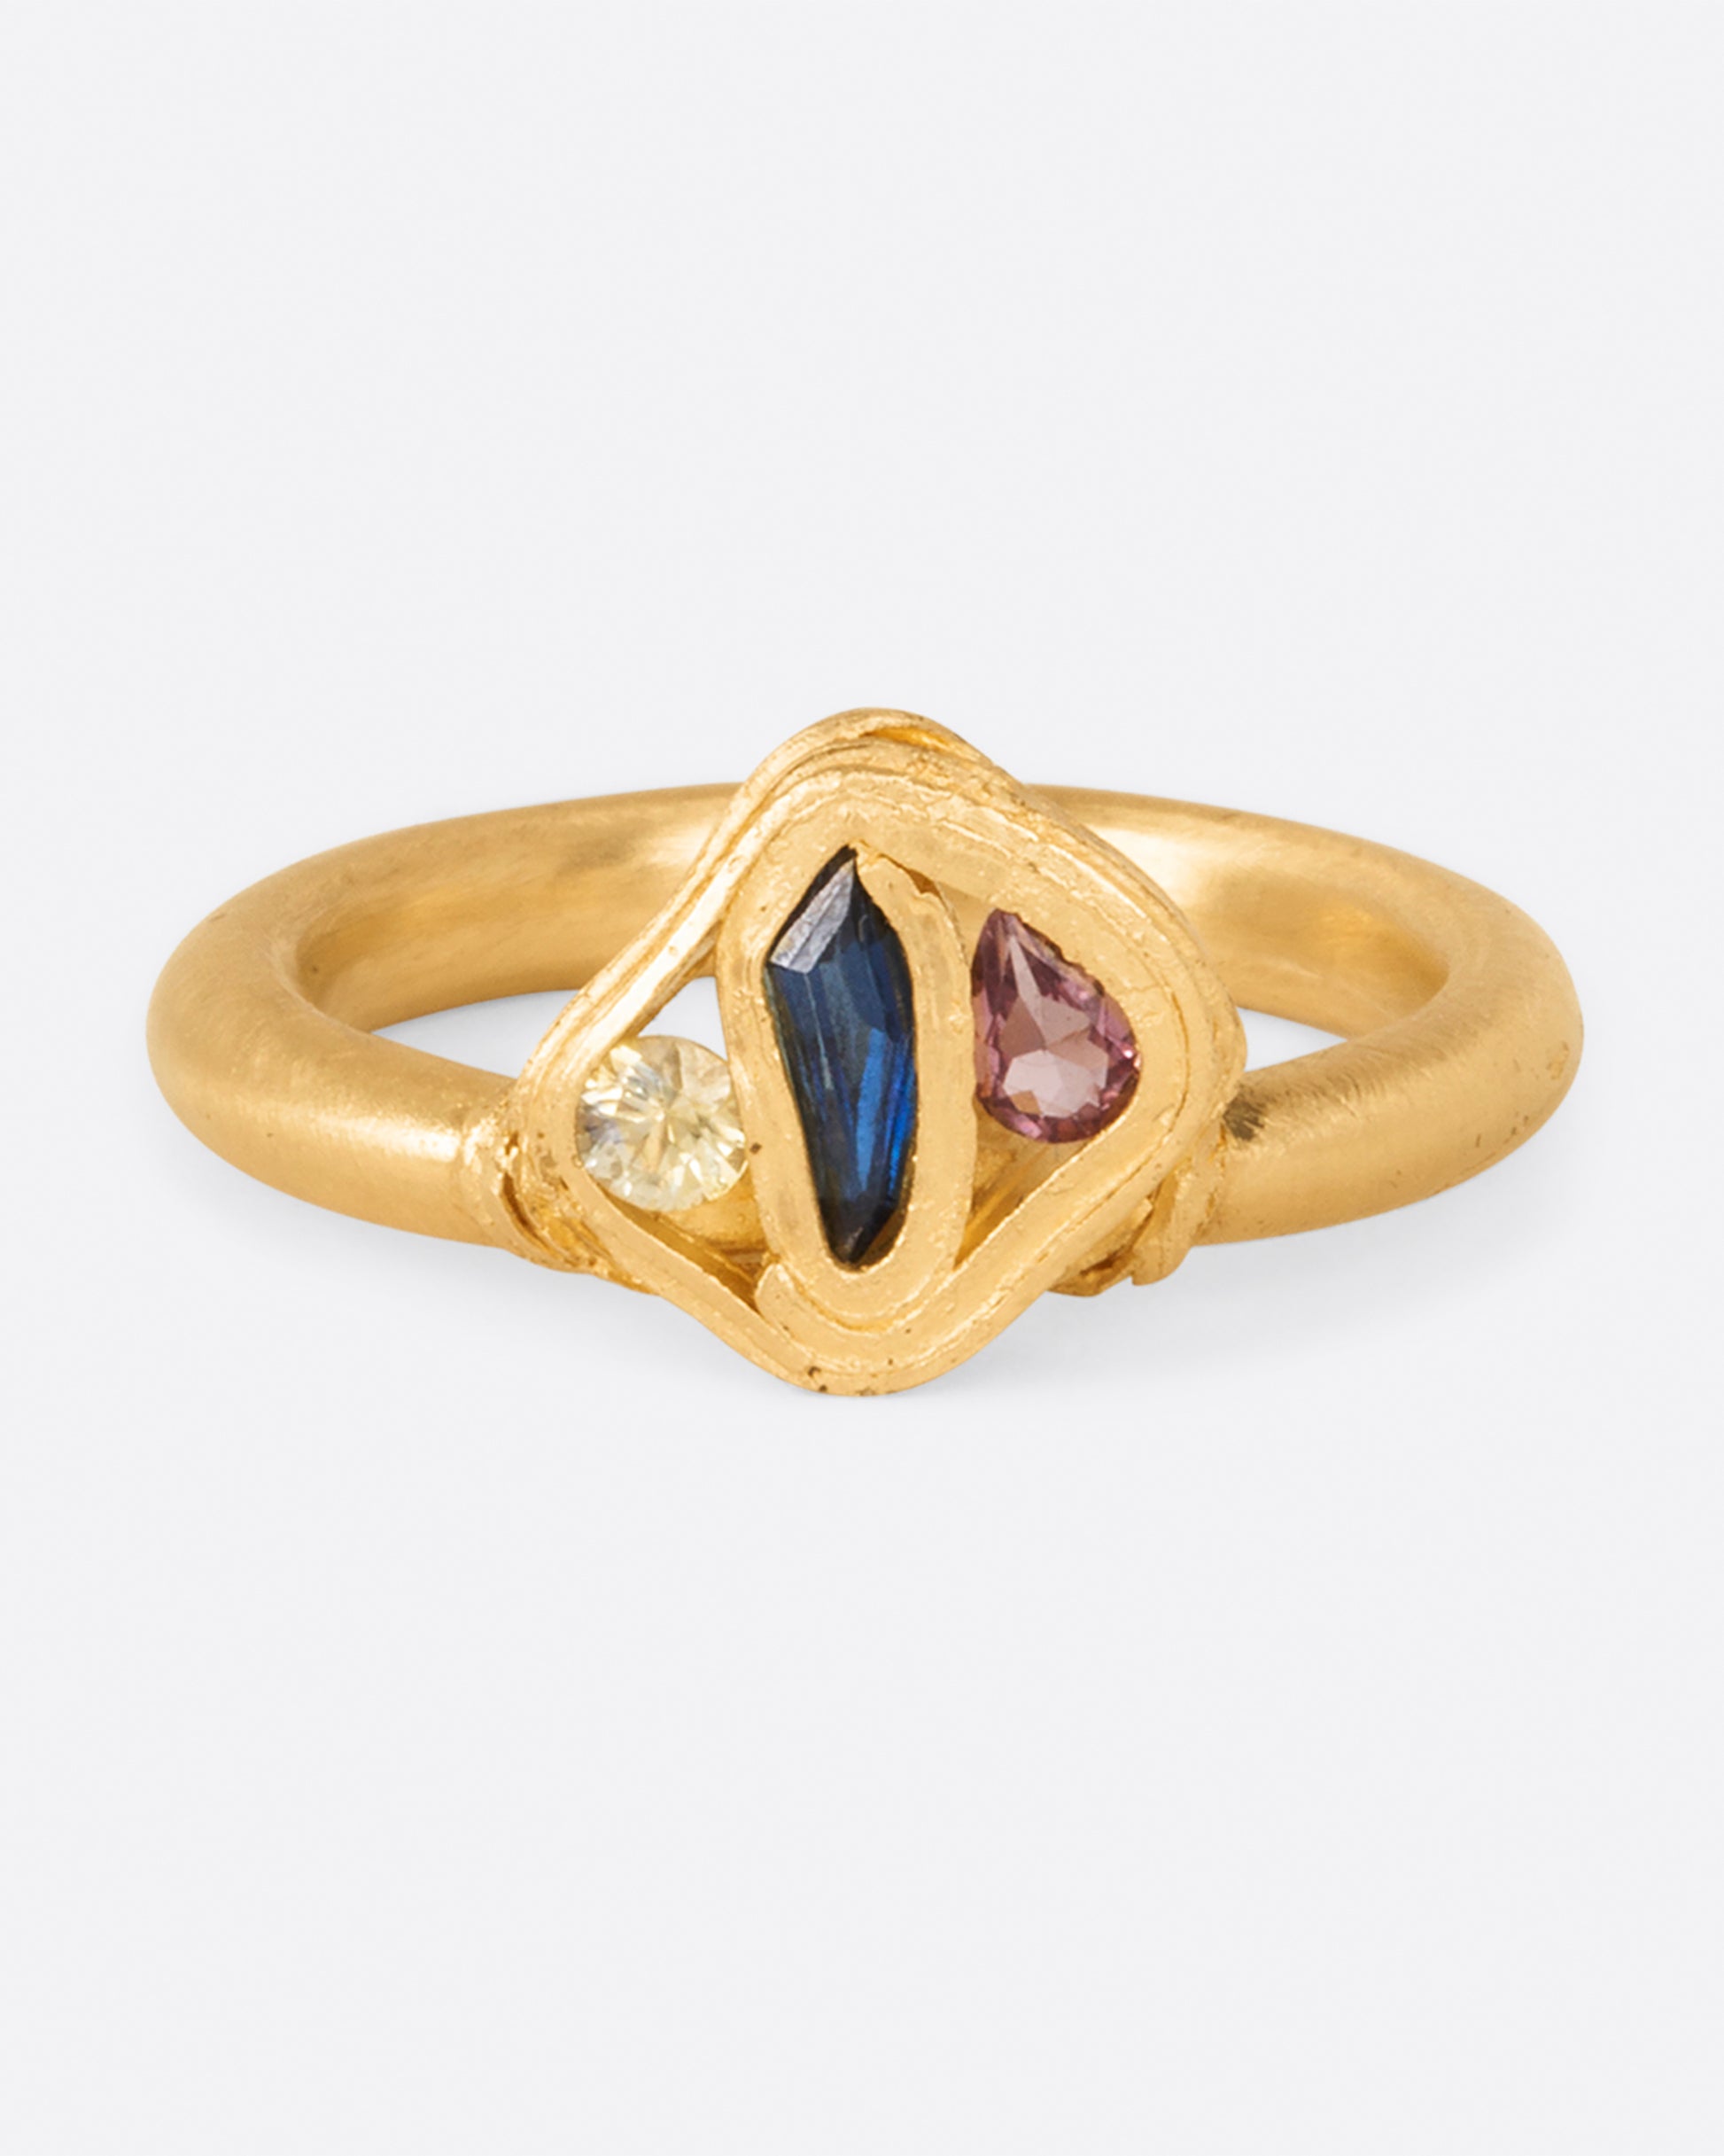 Three sapphires wrapped in yellow gold; one yellow, one pink, and one blue.